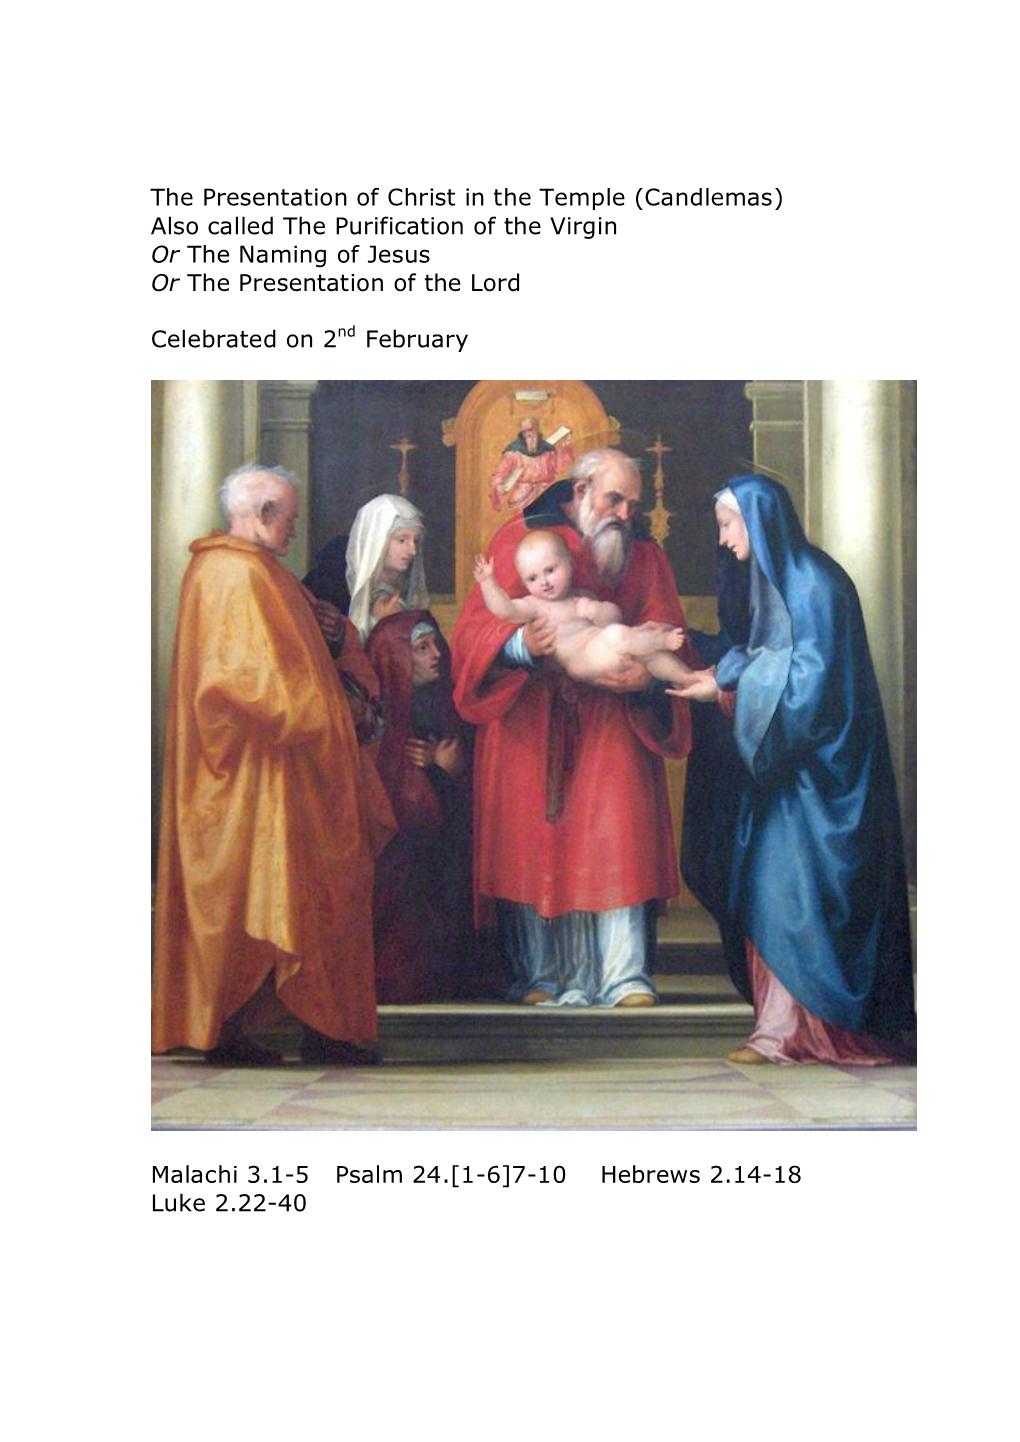 The Presentation of Christ in the Temple (Candlemas) Also Called the Purification of the Virgin Or the Naming of Jesus Or the Presentation of the Lord